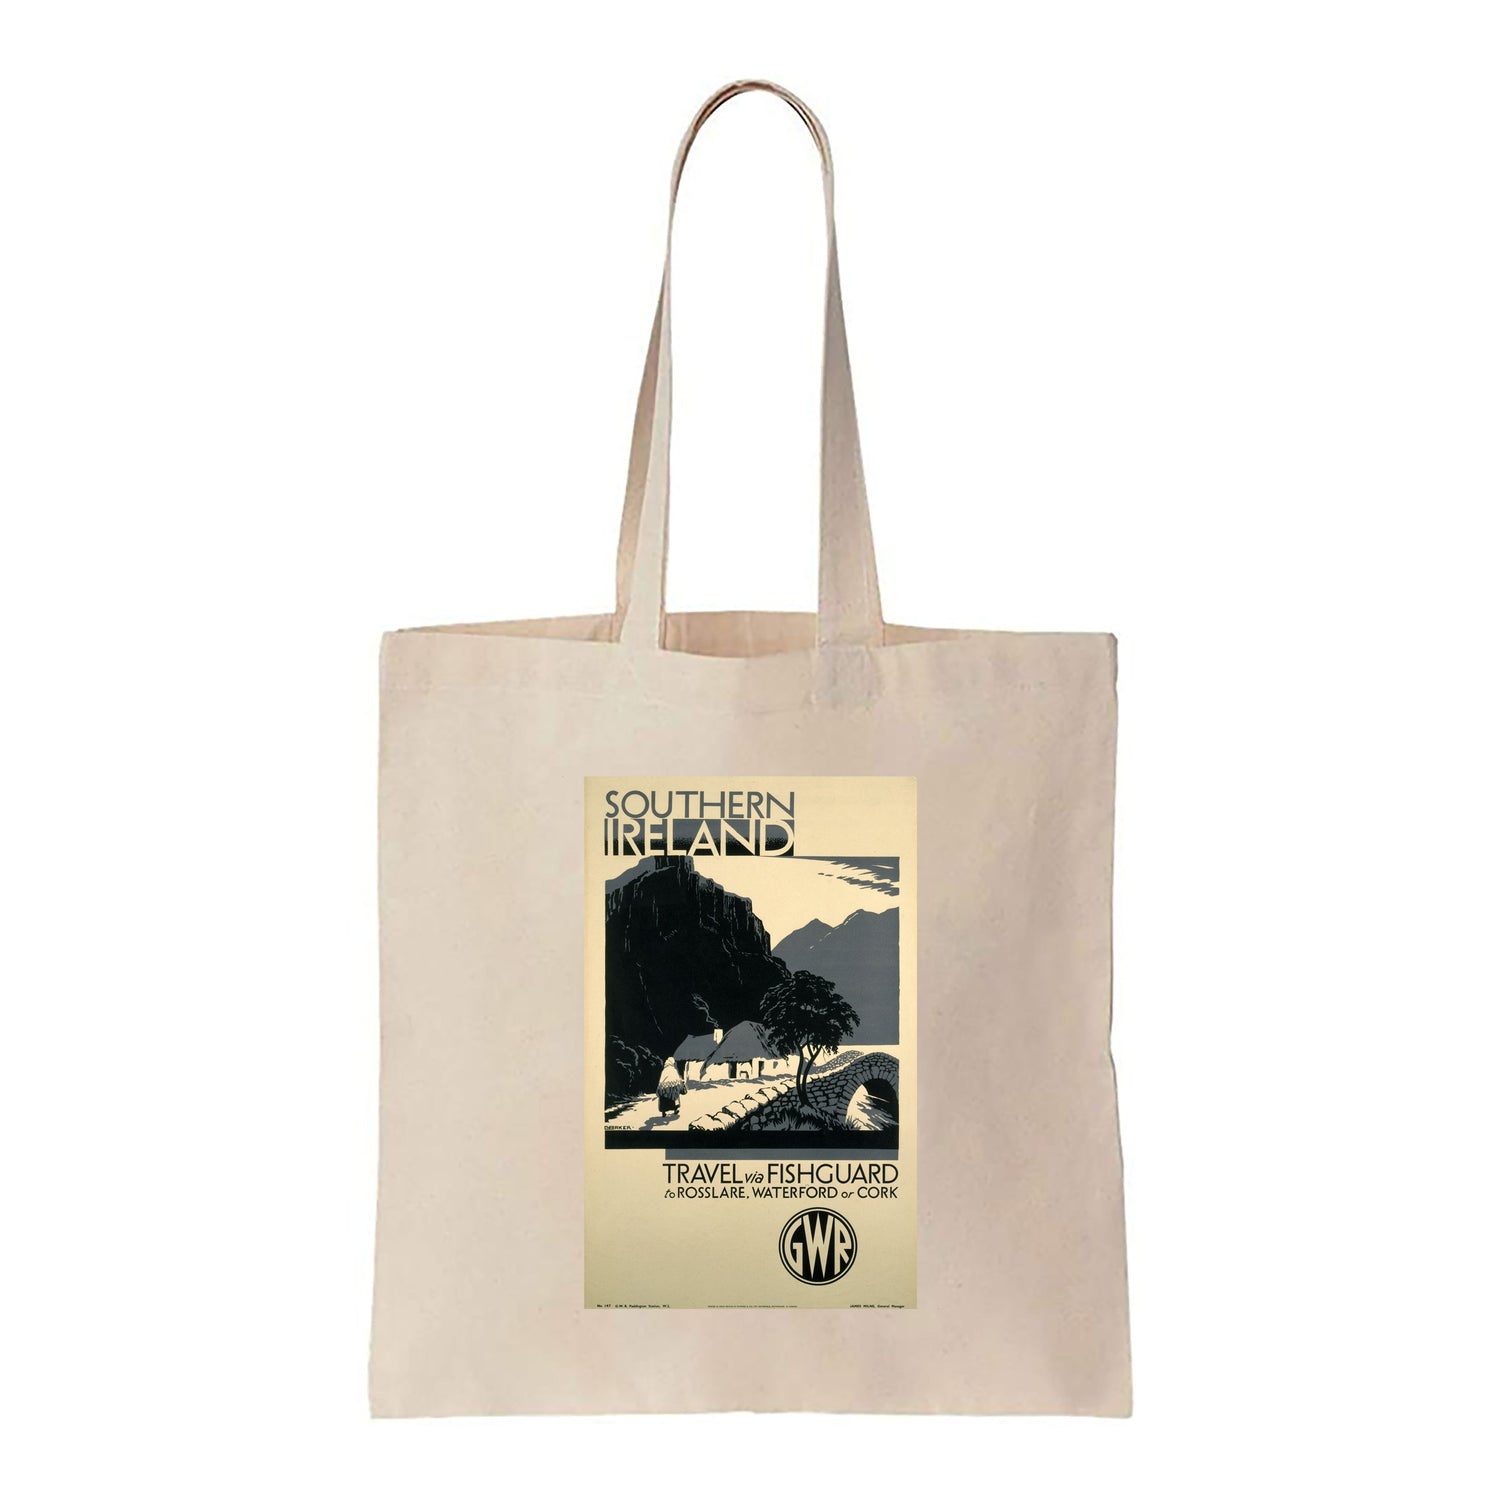 Southern Ireland via Fishguard to Rosslare, Waterford or Cork - Canvas Tote Bag